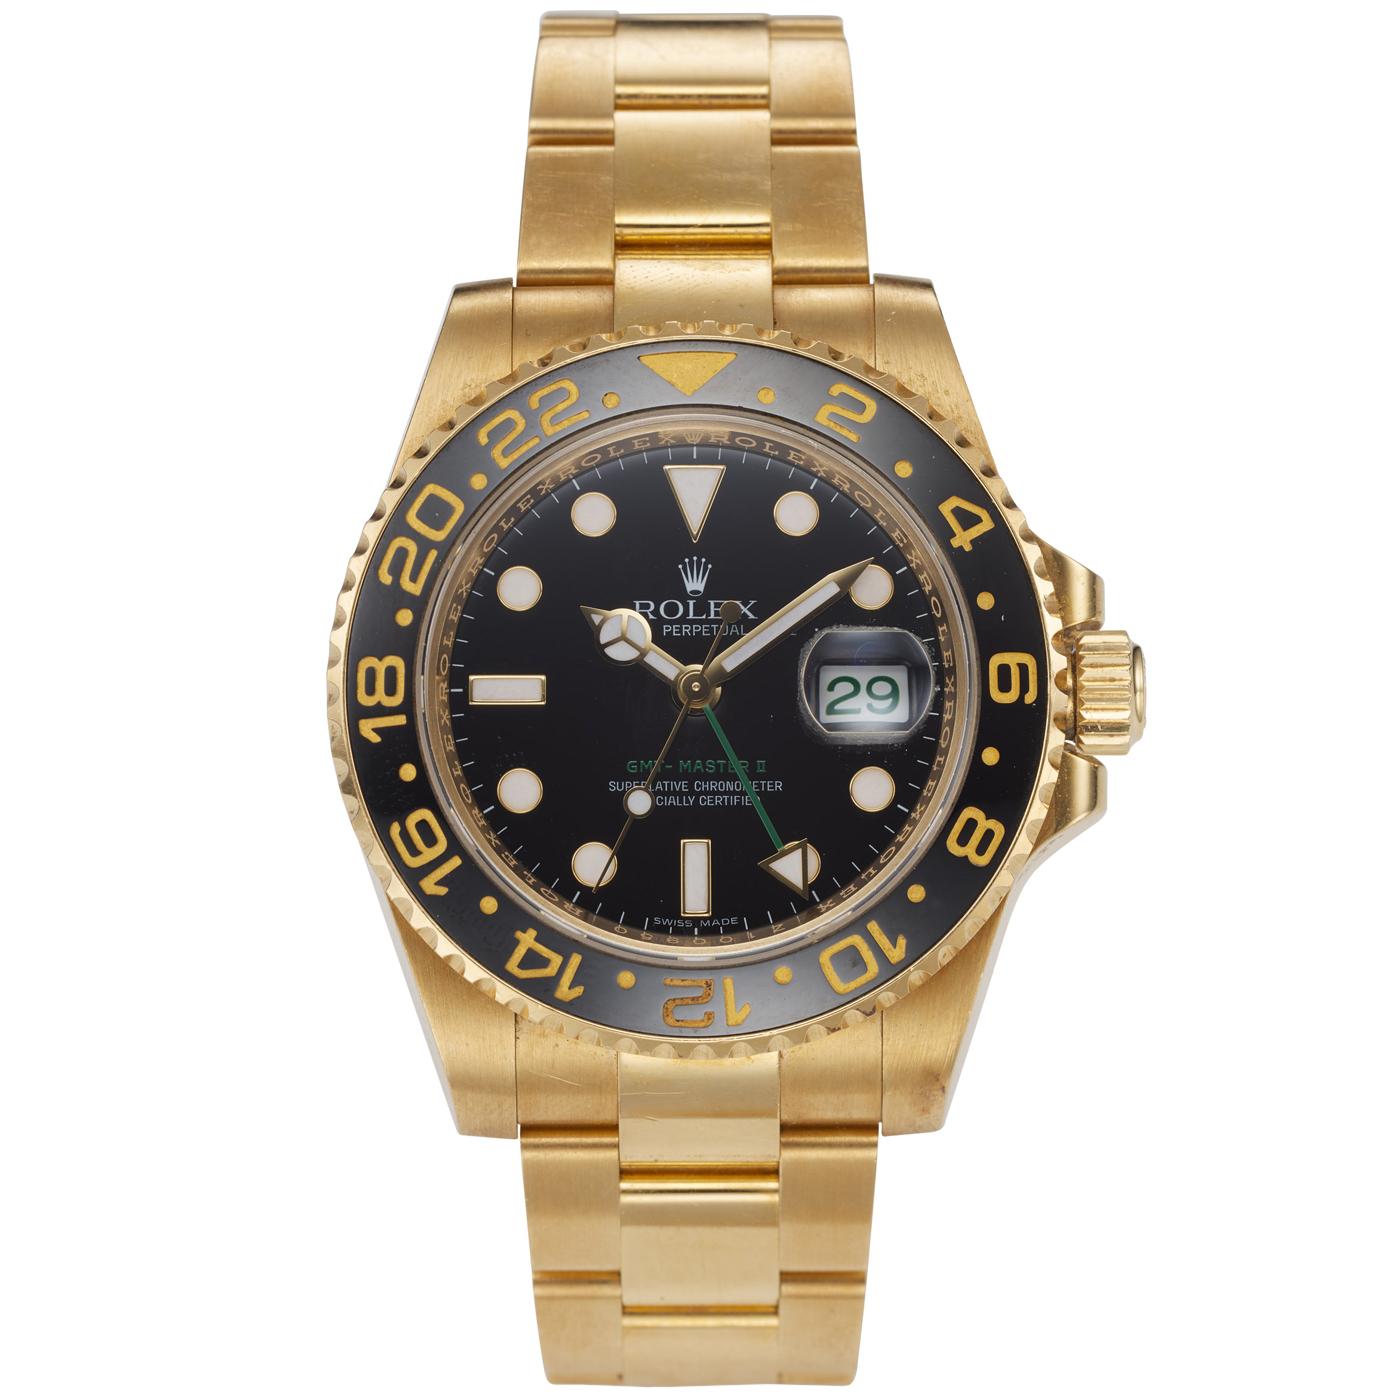 The Rolex GMT Master II is one of Rolex's finest creations. Designed in an 18k yellow gold case featuring a black Cerachrom on the bidirectional bezel, a monobloc middle case, a screw-down case back, and a winding crown. Its black dial features